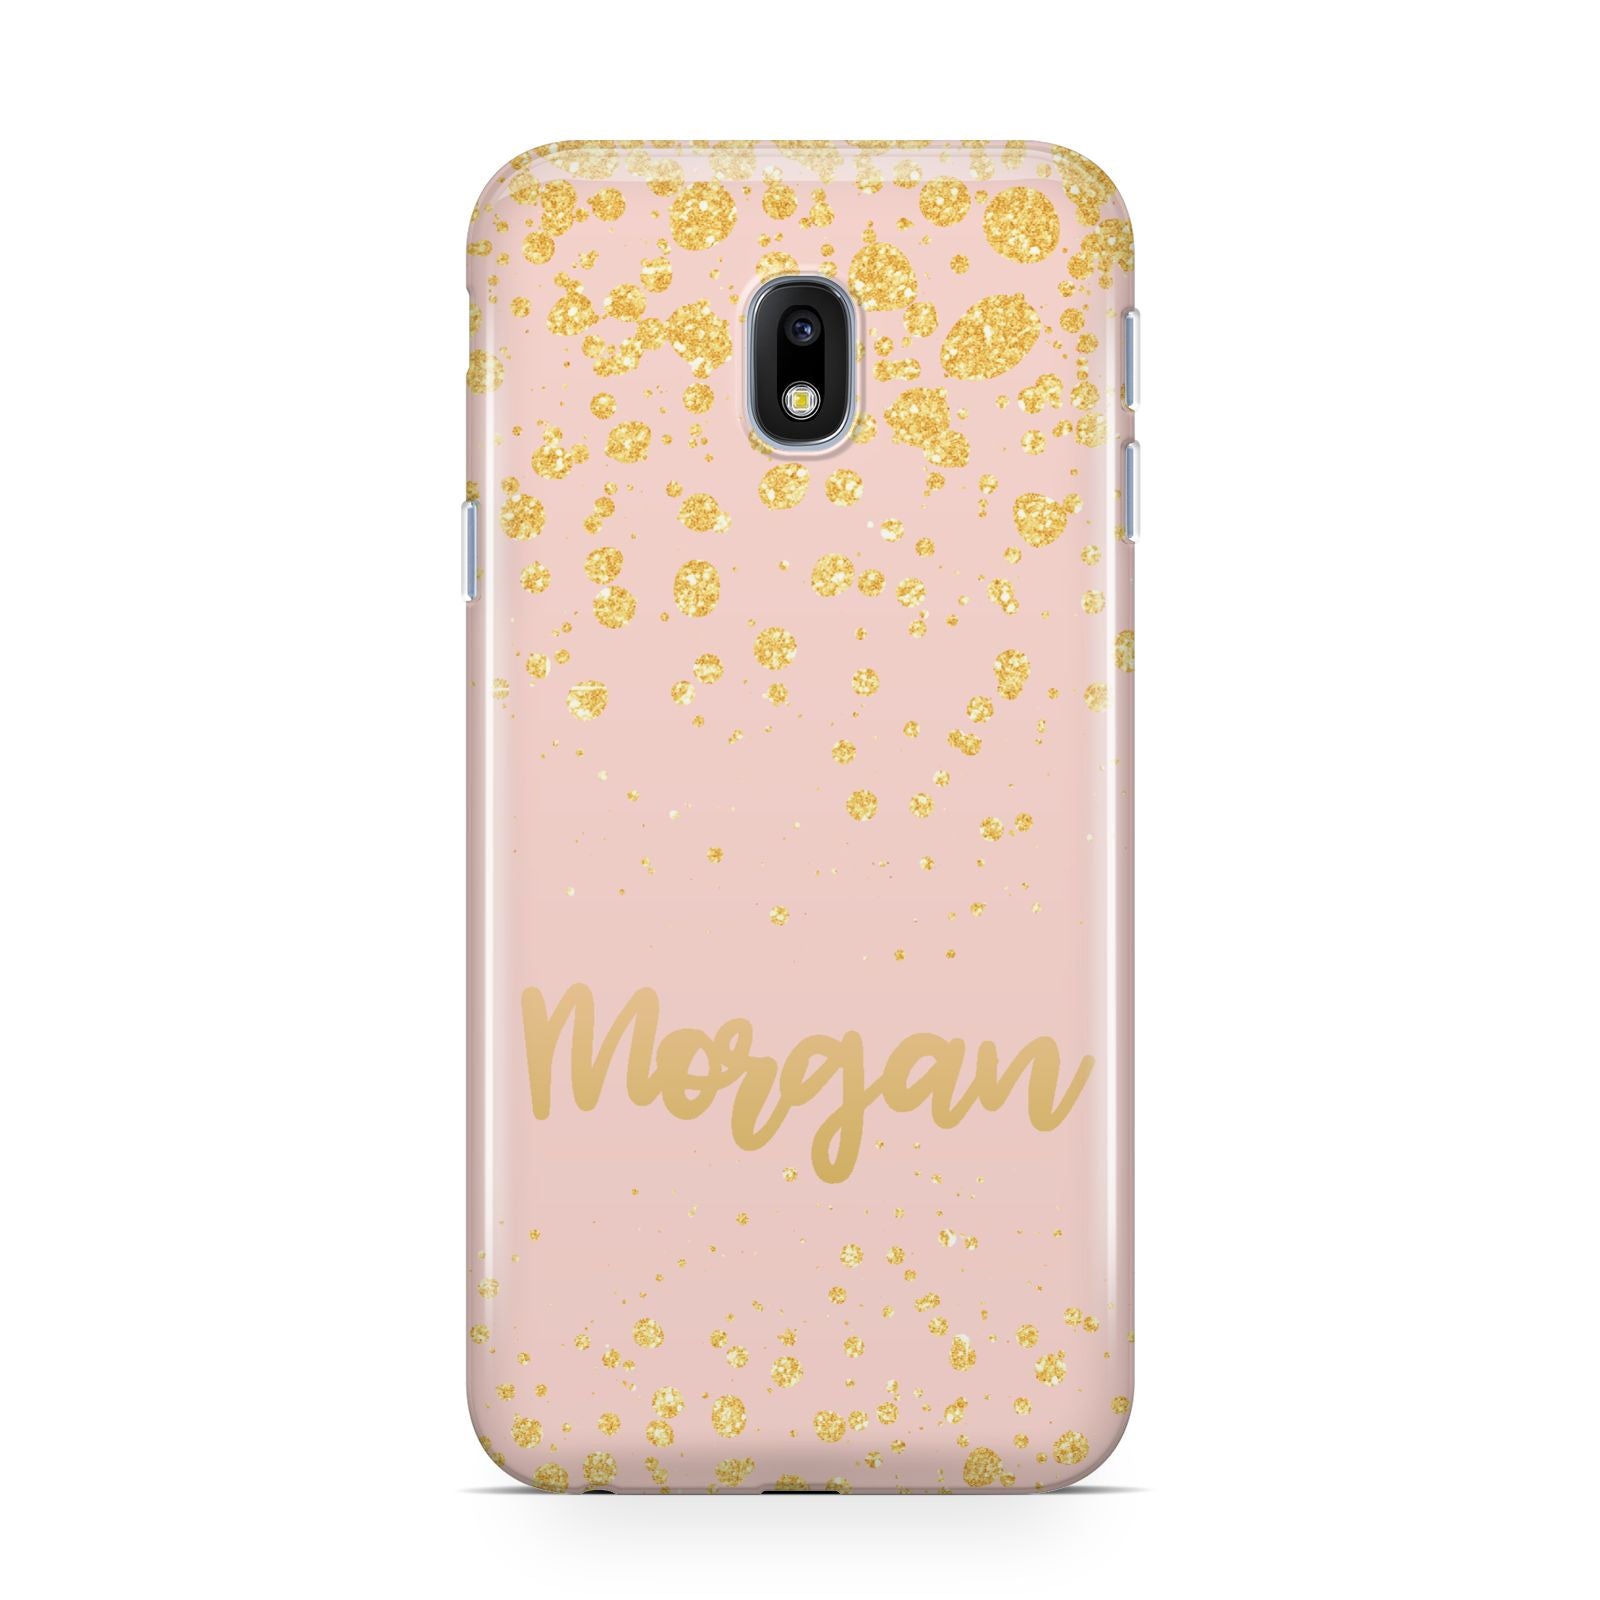 Personalised Pink Gold Splatter With Name Samsung Galaxy J3 2017 Case